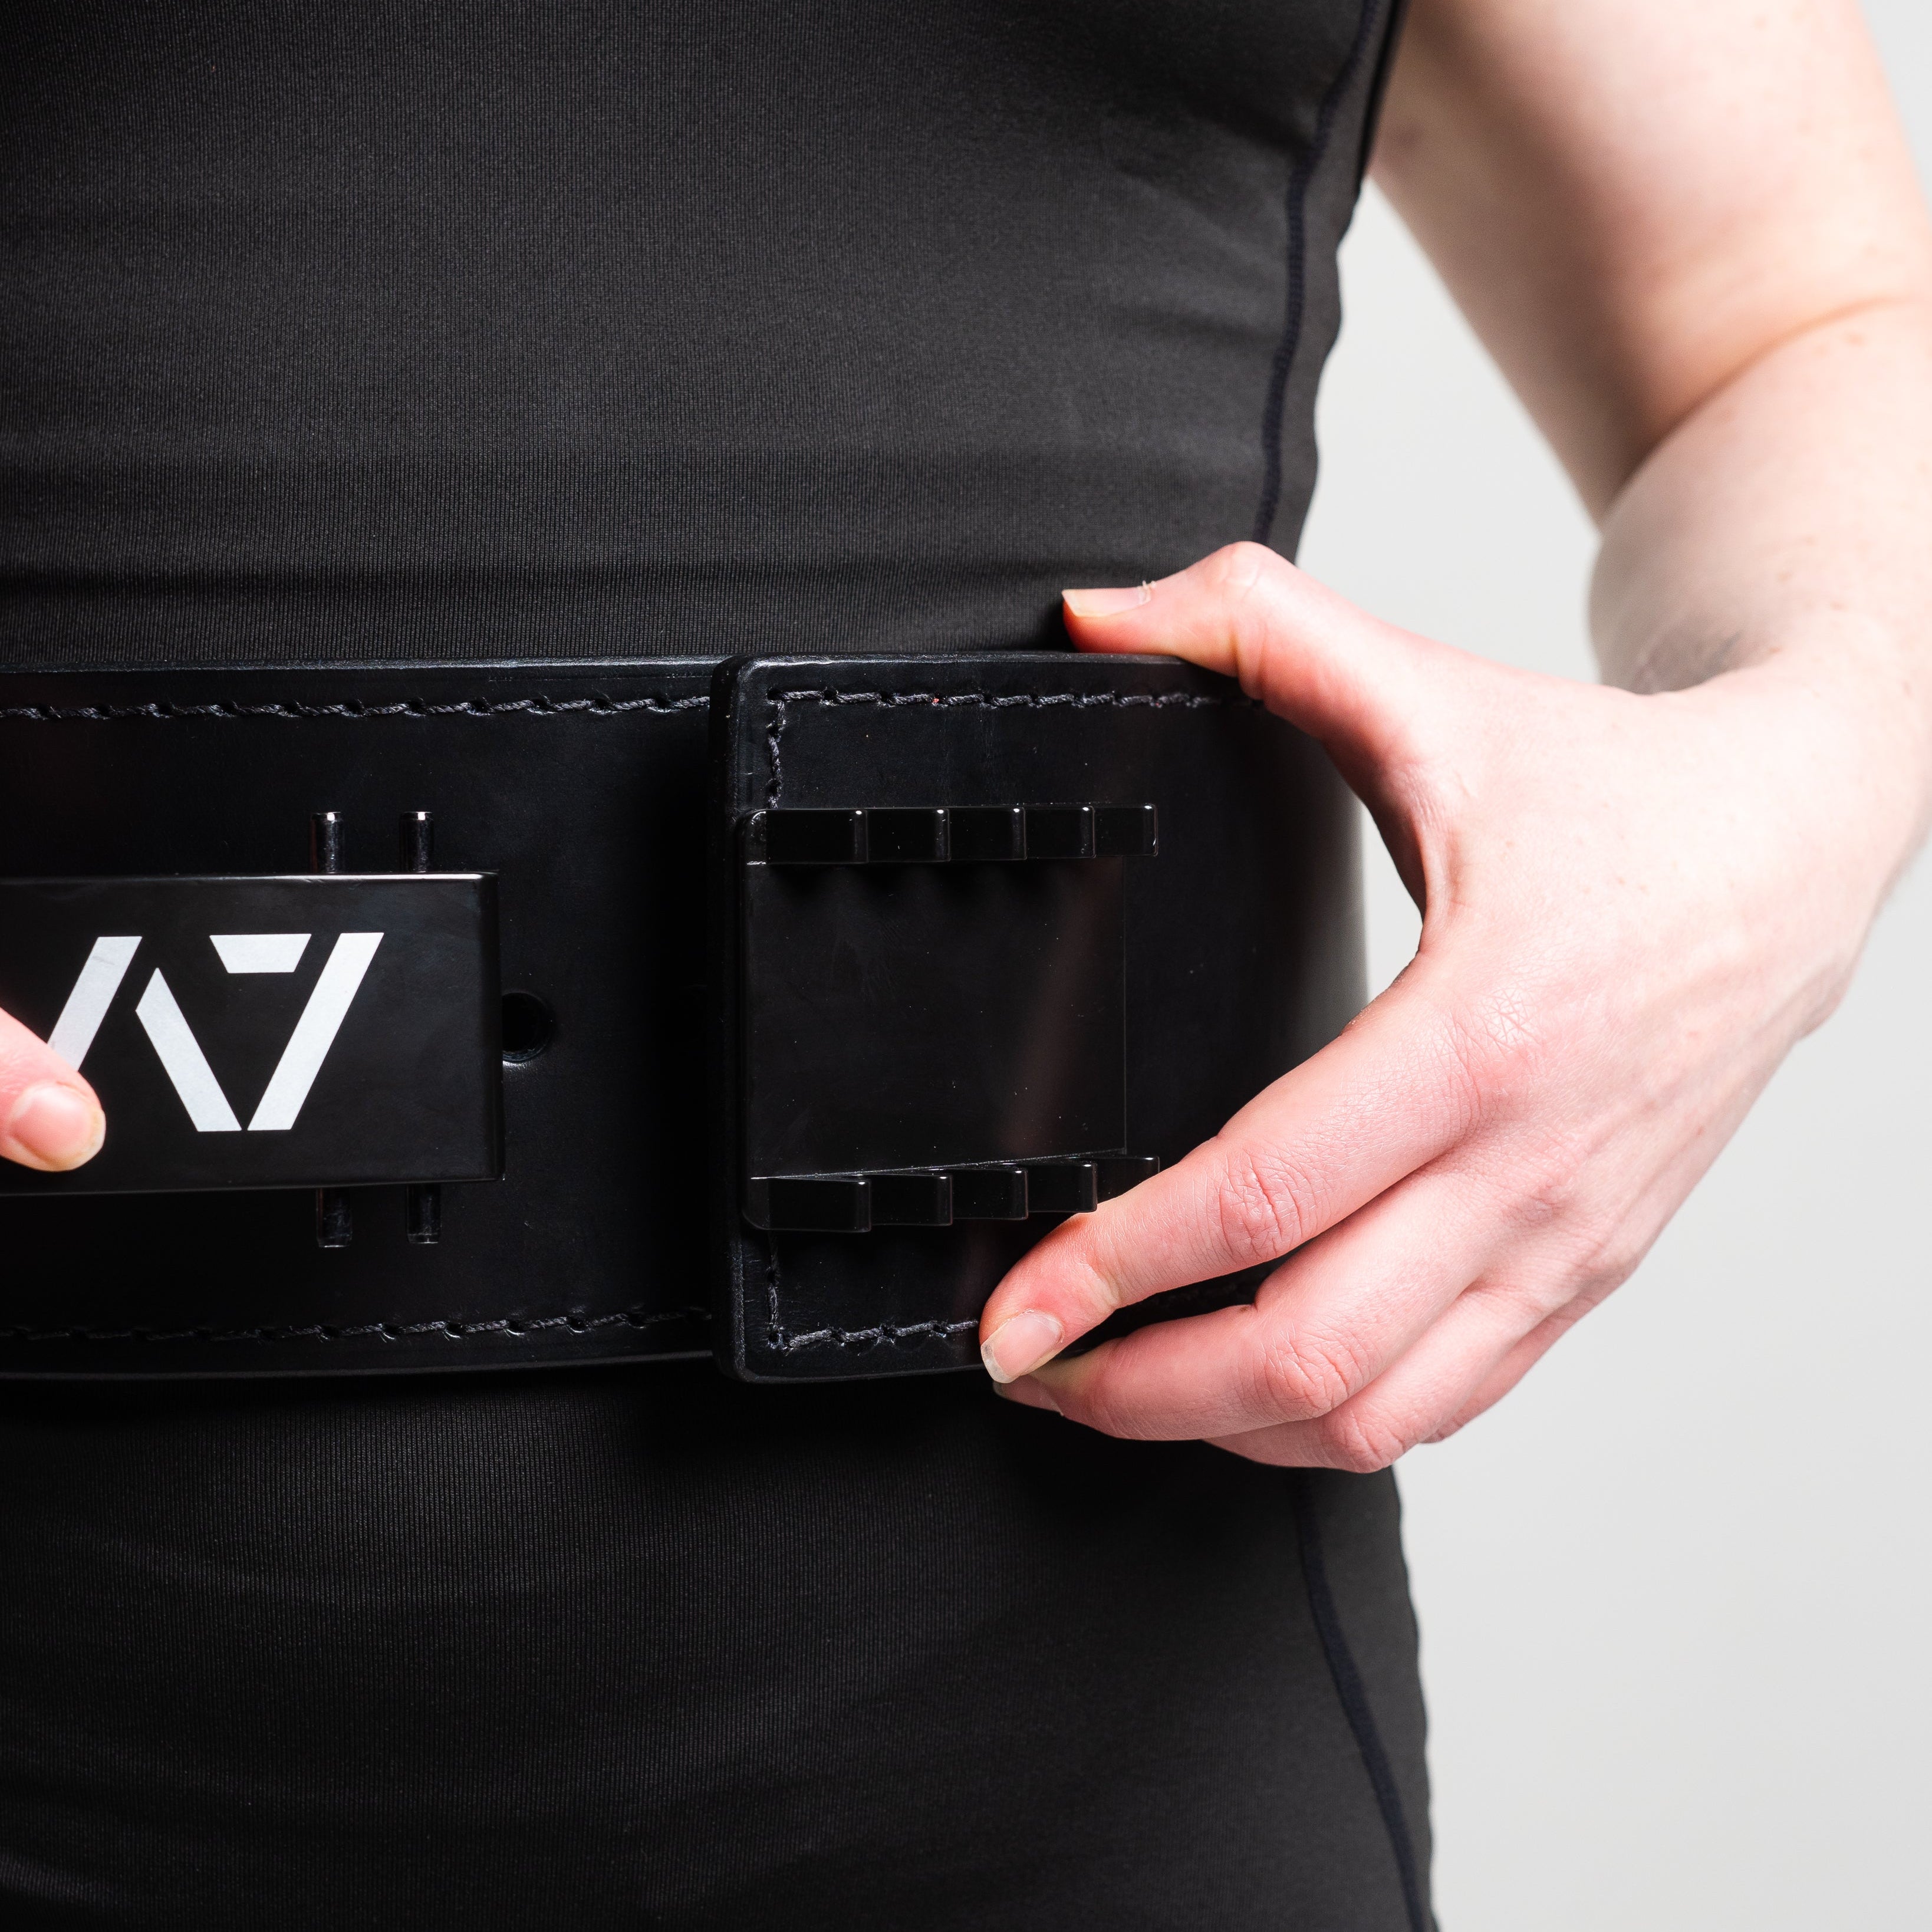 A7 IPF Approved Lever Belt features a black design with black leather, black engraved buckle and debossed A7 logo on the leather. The new Pioneer Adjustable Lever, PAL, buckle allows you to quickly adjust the tightness of your belt for a perfect fit. The IPF Approved Kit includes Singlet, A7 Meet Shirt, A7 Zebra Wrist Wraps, A7 Deadlift Socks, Hourglass Knee Sleeves (Stiff Knee Sleeves and Rigor Mortis Knee Sleeves). Genouillères powerlifting shipping to France, Spain, Ireland, Germany, Italy and EU.